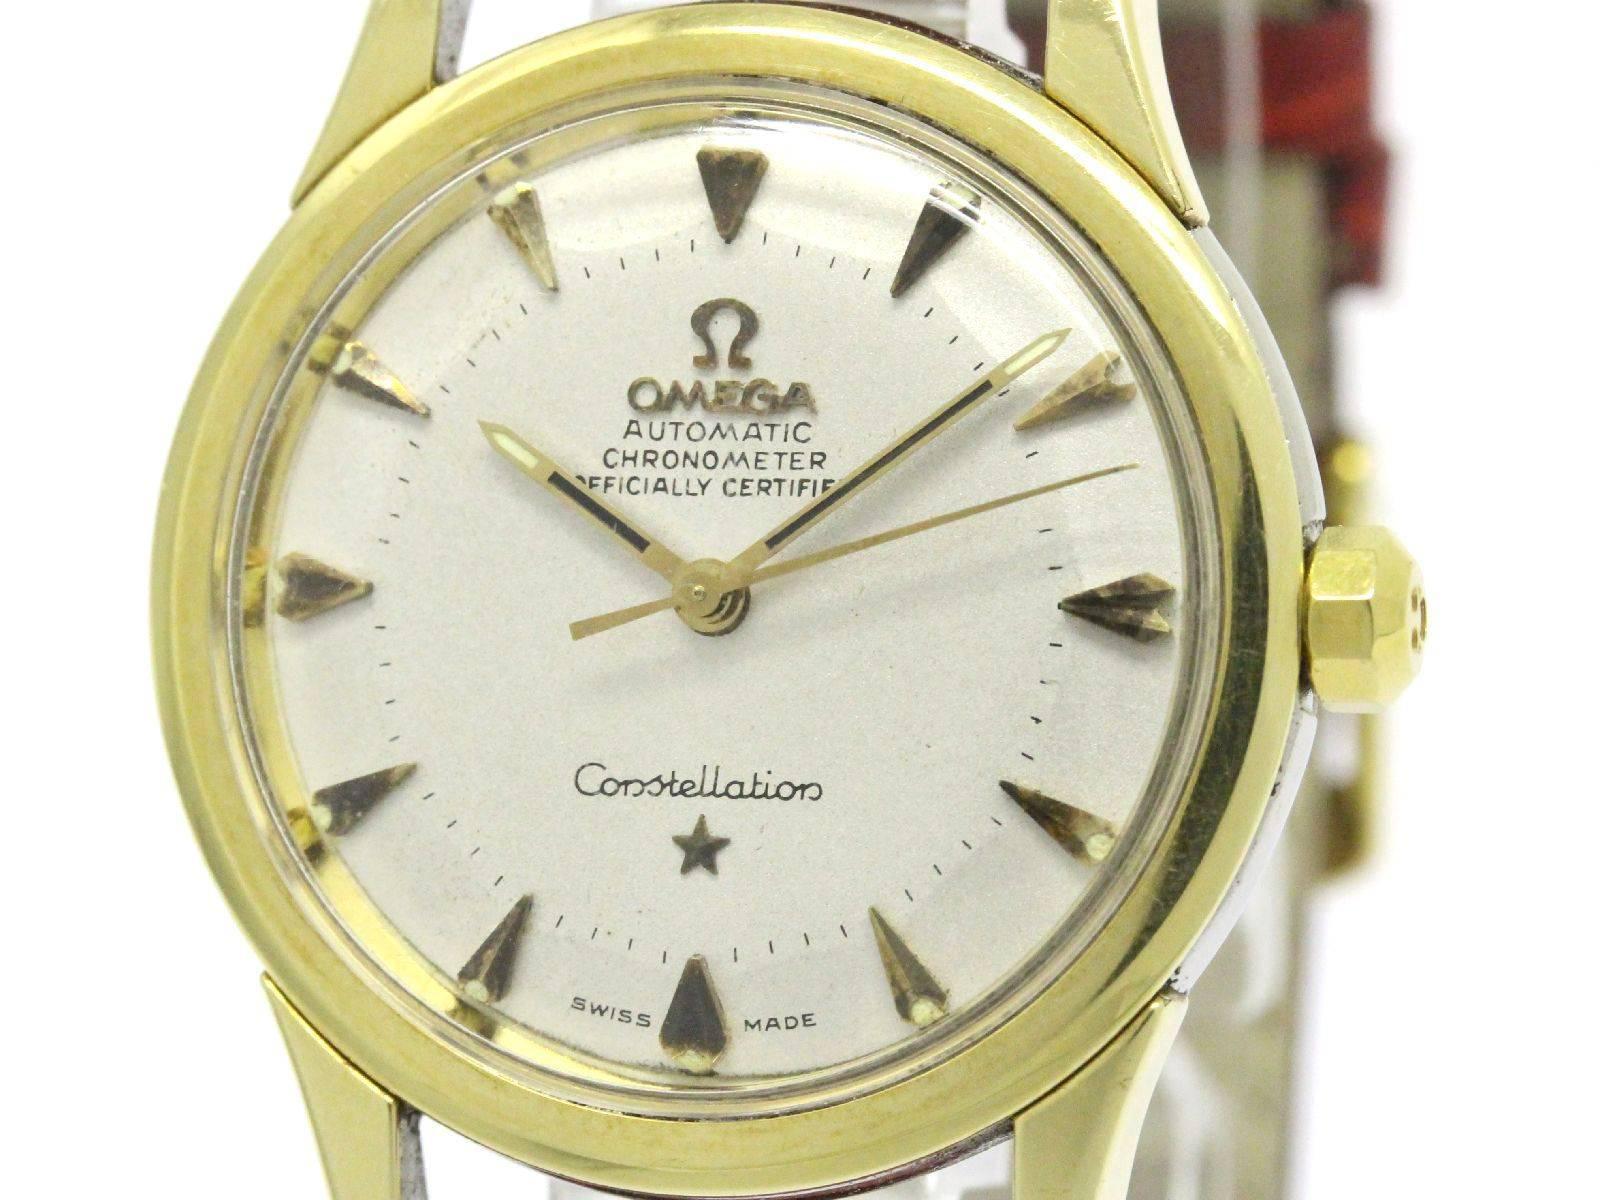 CURATOR'S NOTES

Leather band
Yellow gold
Stainless steel
Automatic movement
Swiss made
Case diameter 35mm 
Band size 6-7.3